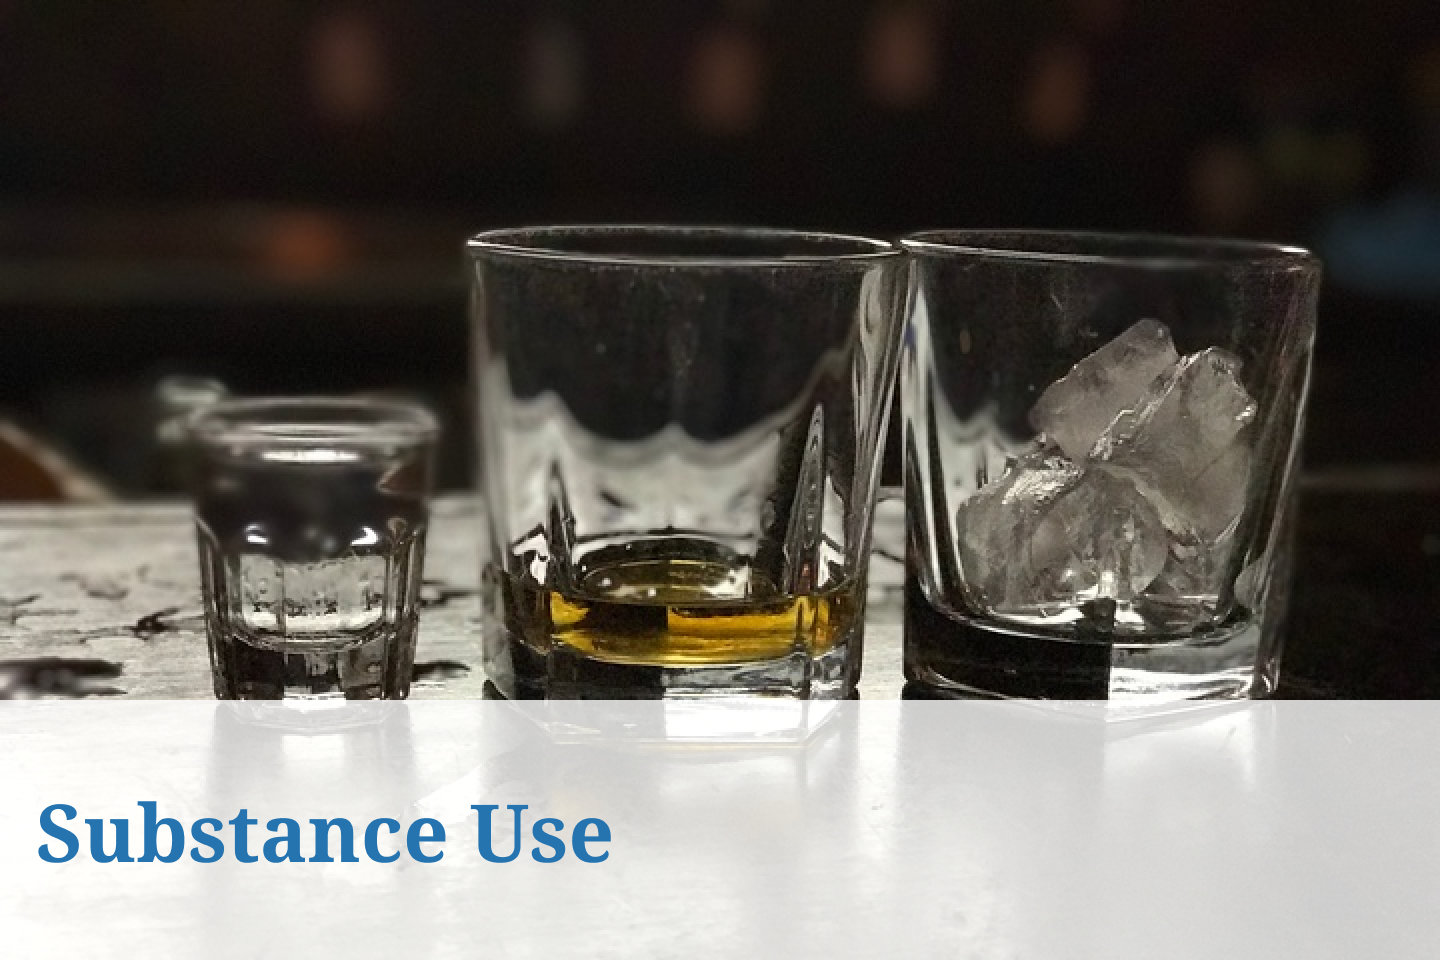 3 whiskey glasses sitting on a bar table